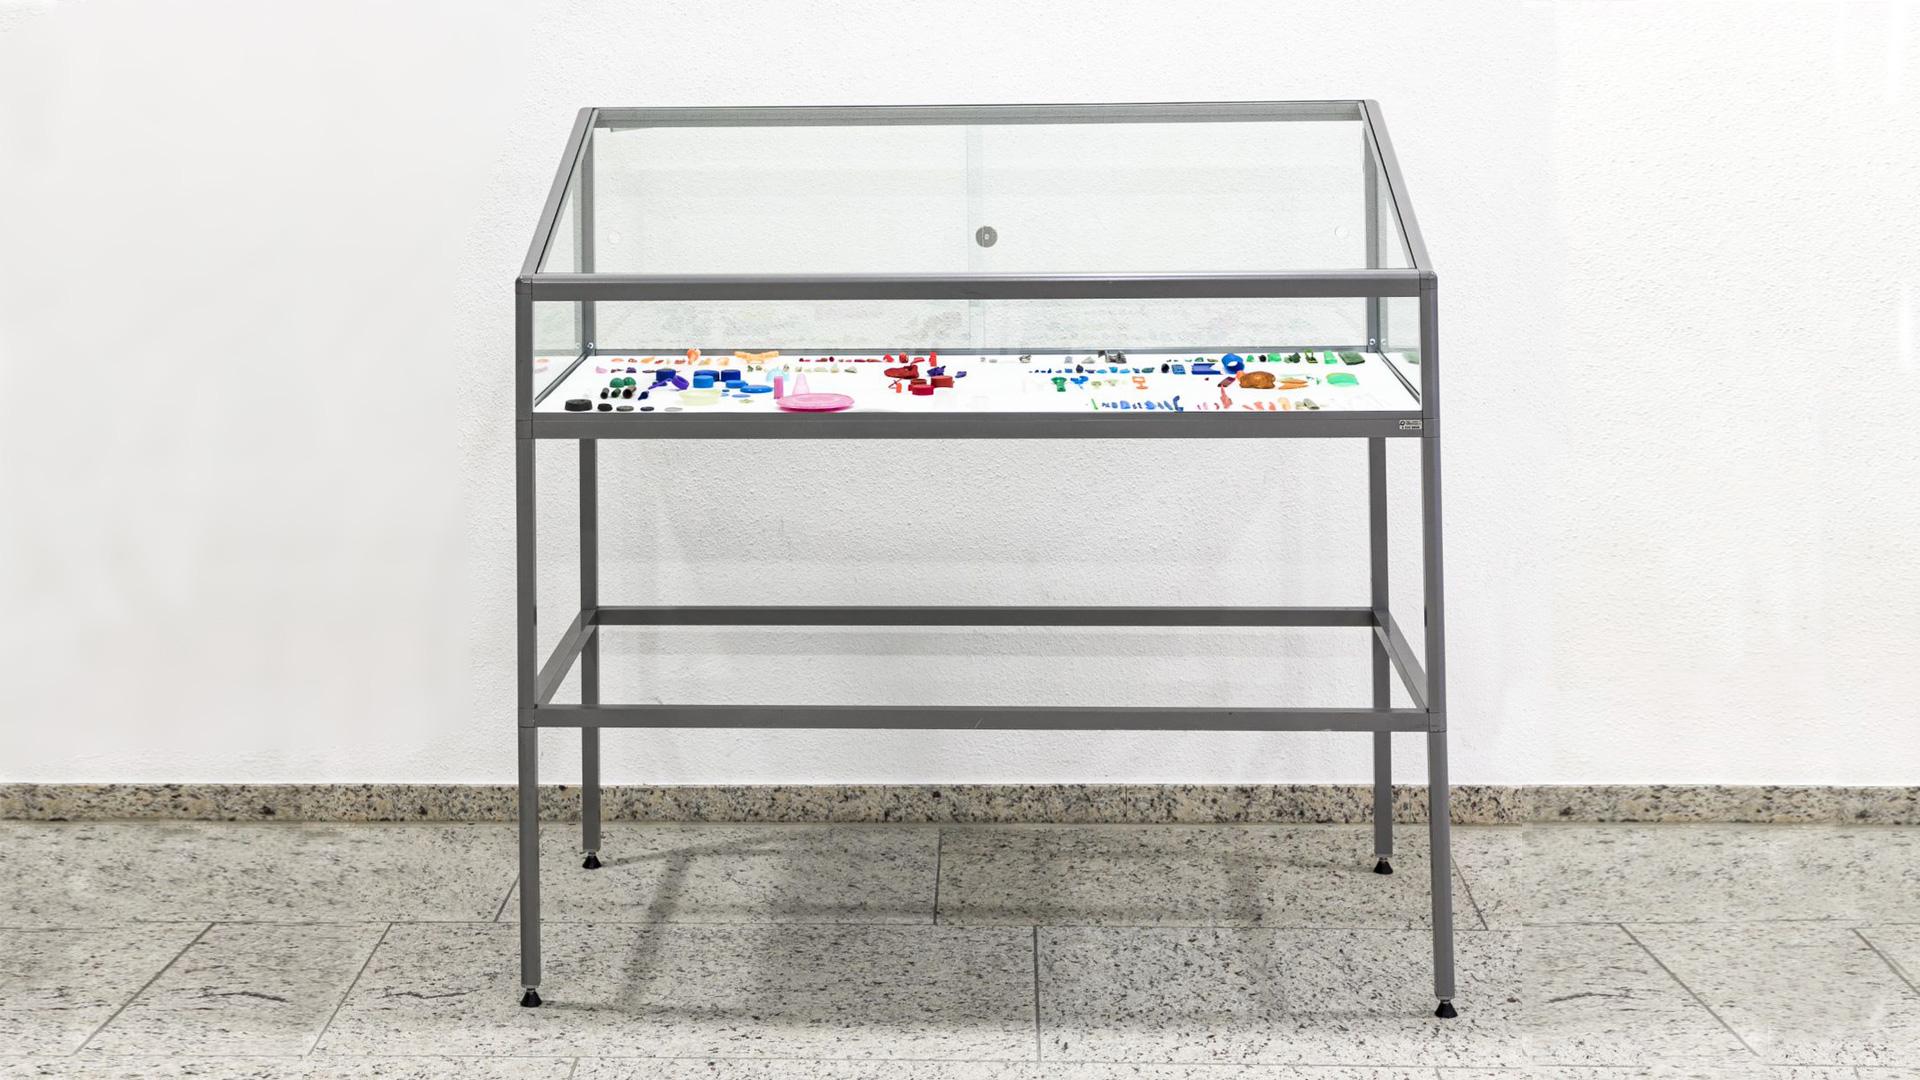 Untitled for Carl von Linné, 2011   Showcase of glass and steel, plastic                      120 x 126 x 60 cm   Installation view 